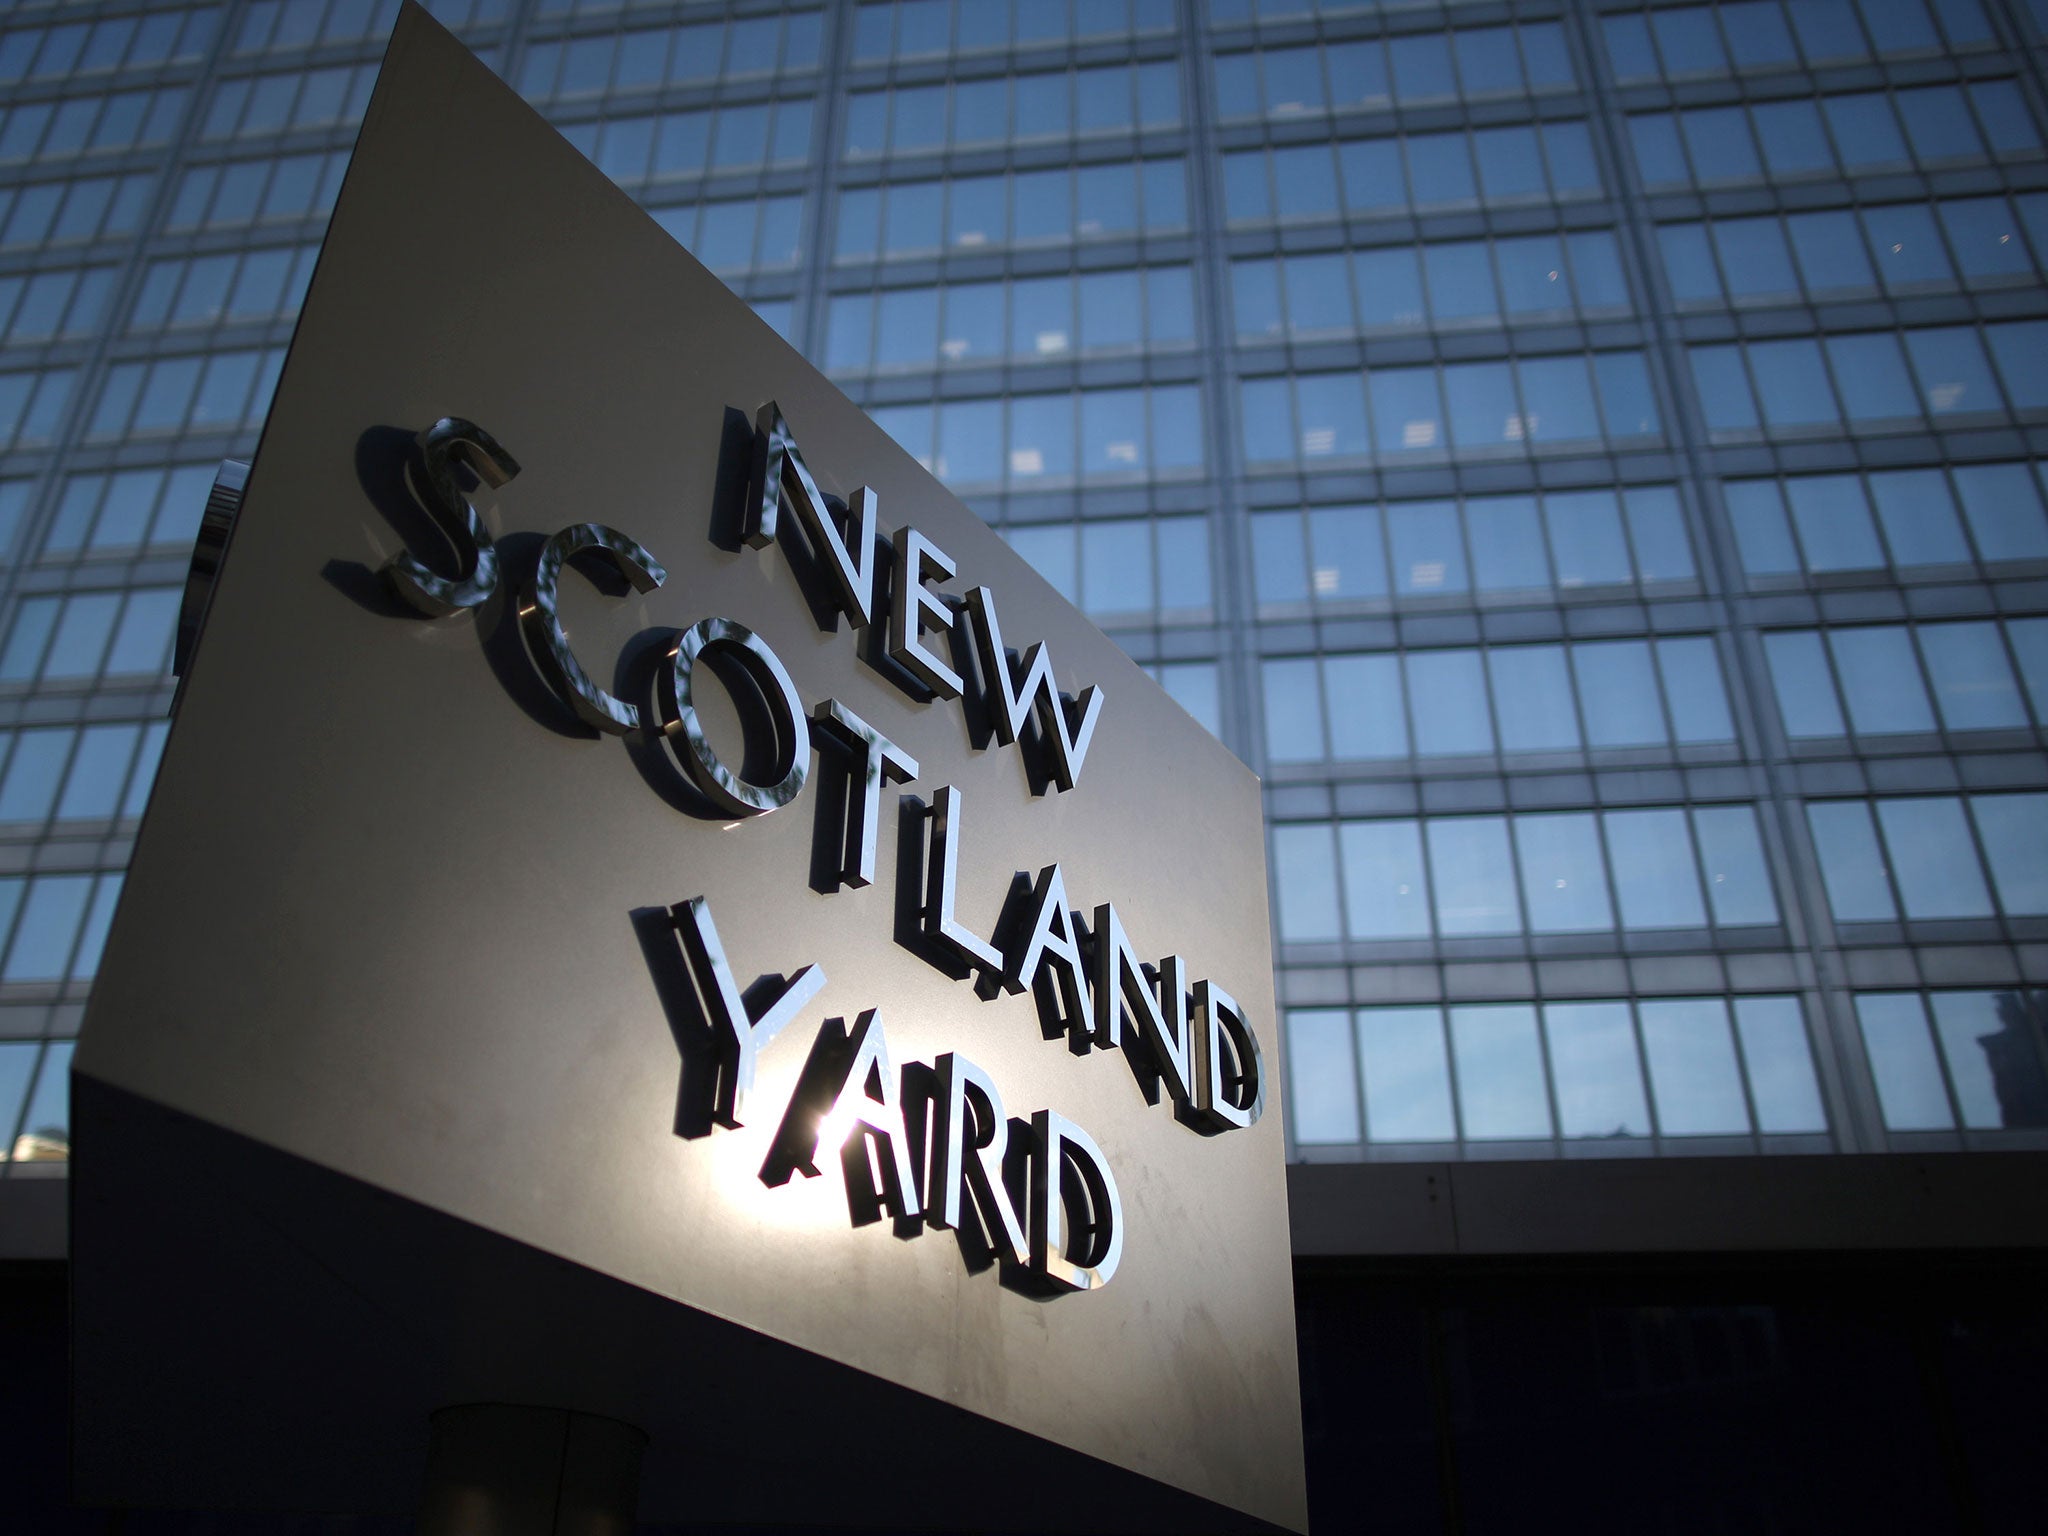 Scotland Yard is to be investigated over claims of high level corruption that led to the covering up of child sex abuse cases 